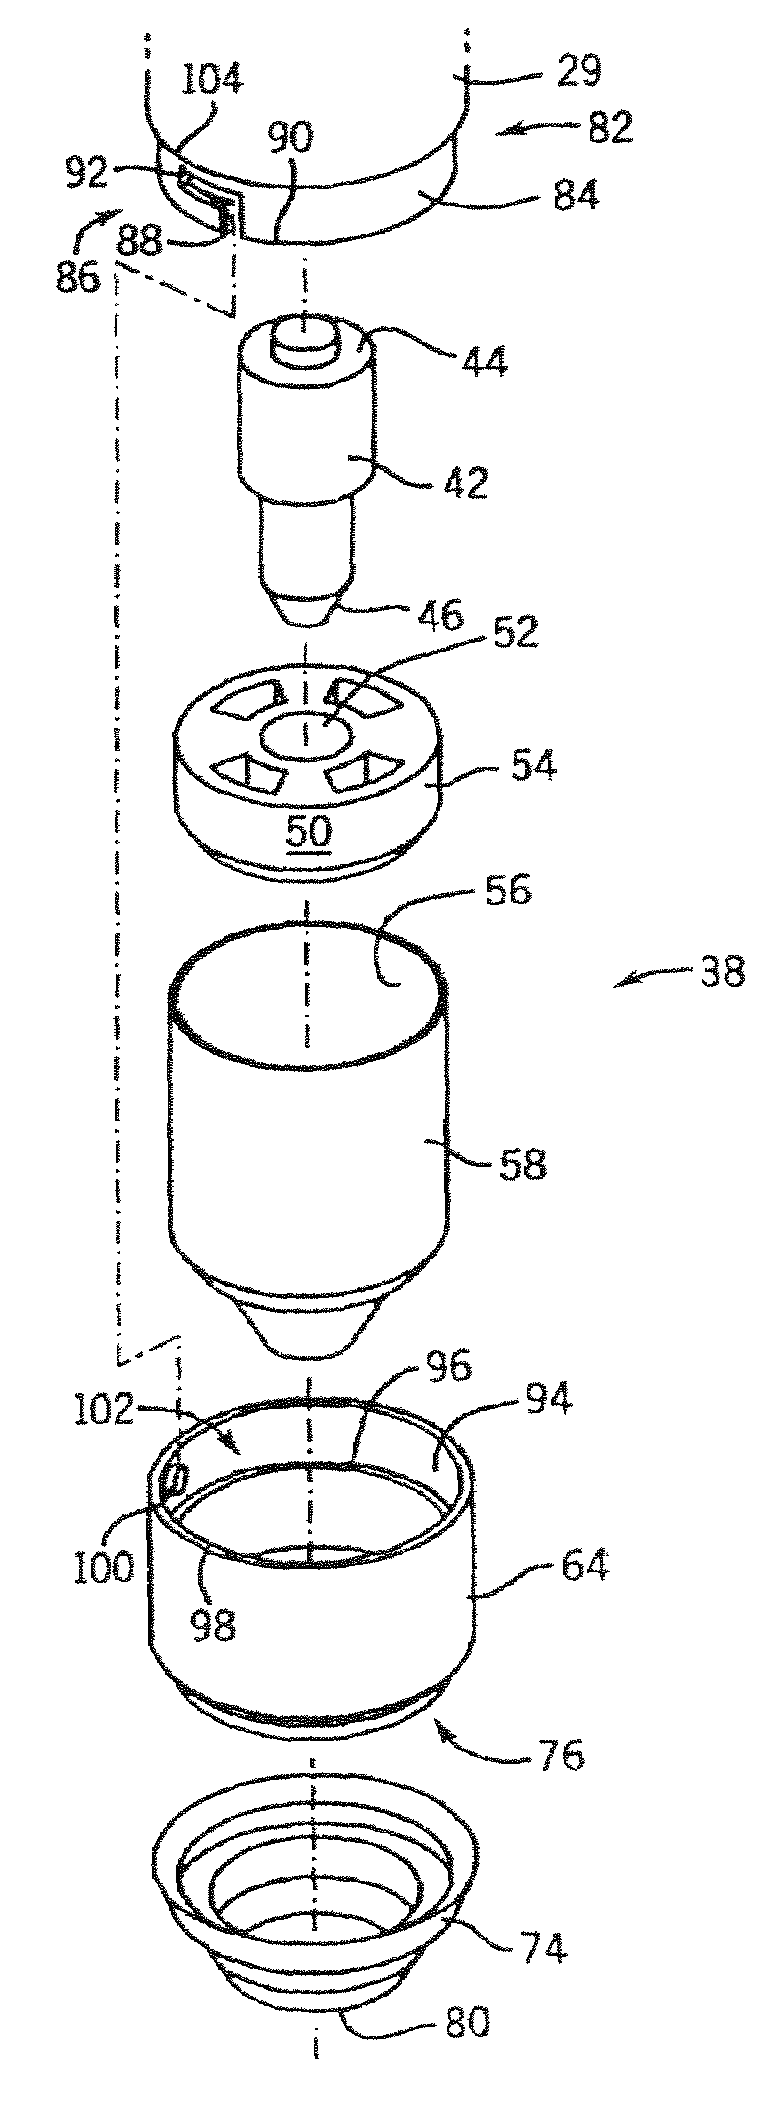 Plasma torch having a quick-connect retaining cup